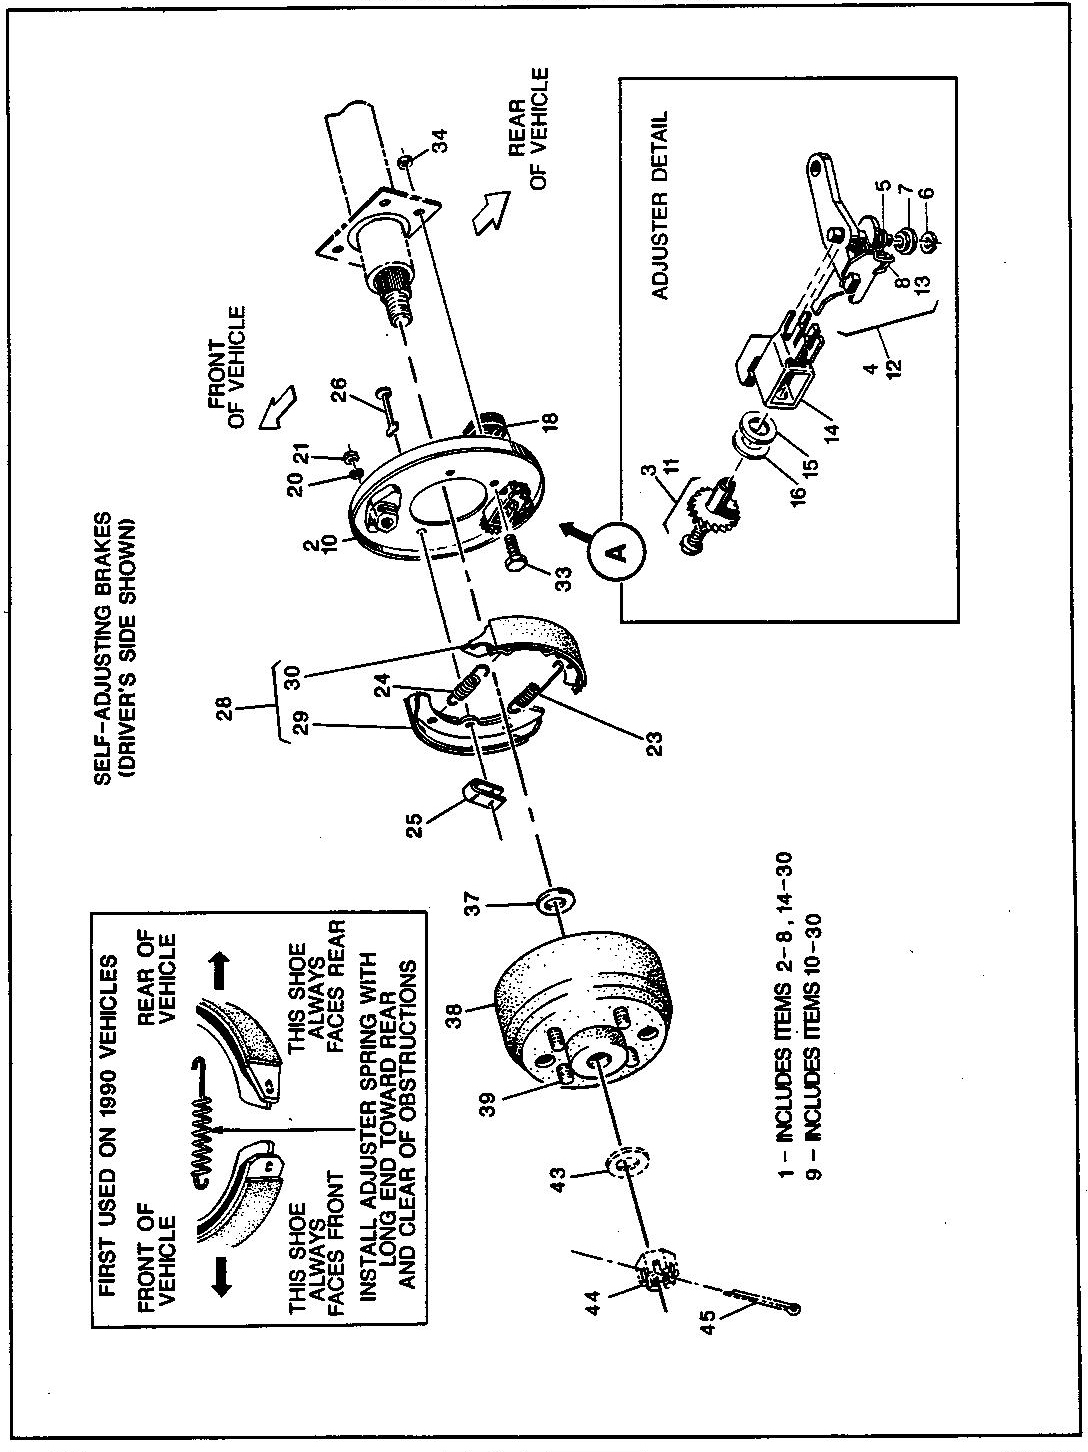 44_1989-1991 Electric and Gas Wheel Brake - First Used for Model Year 1990